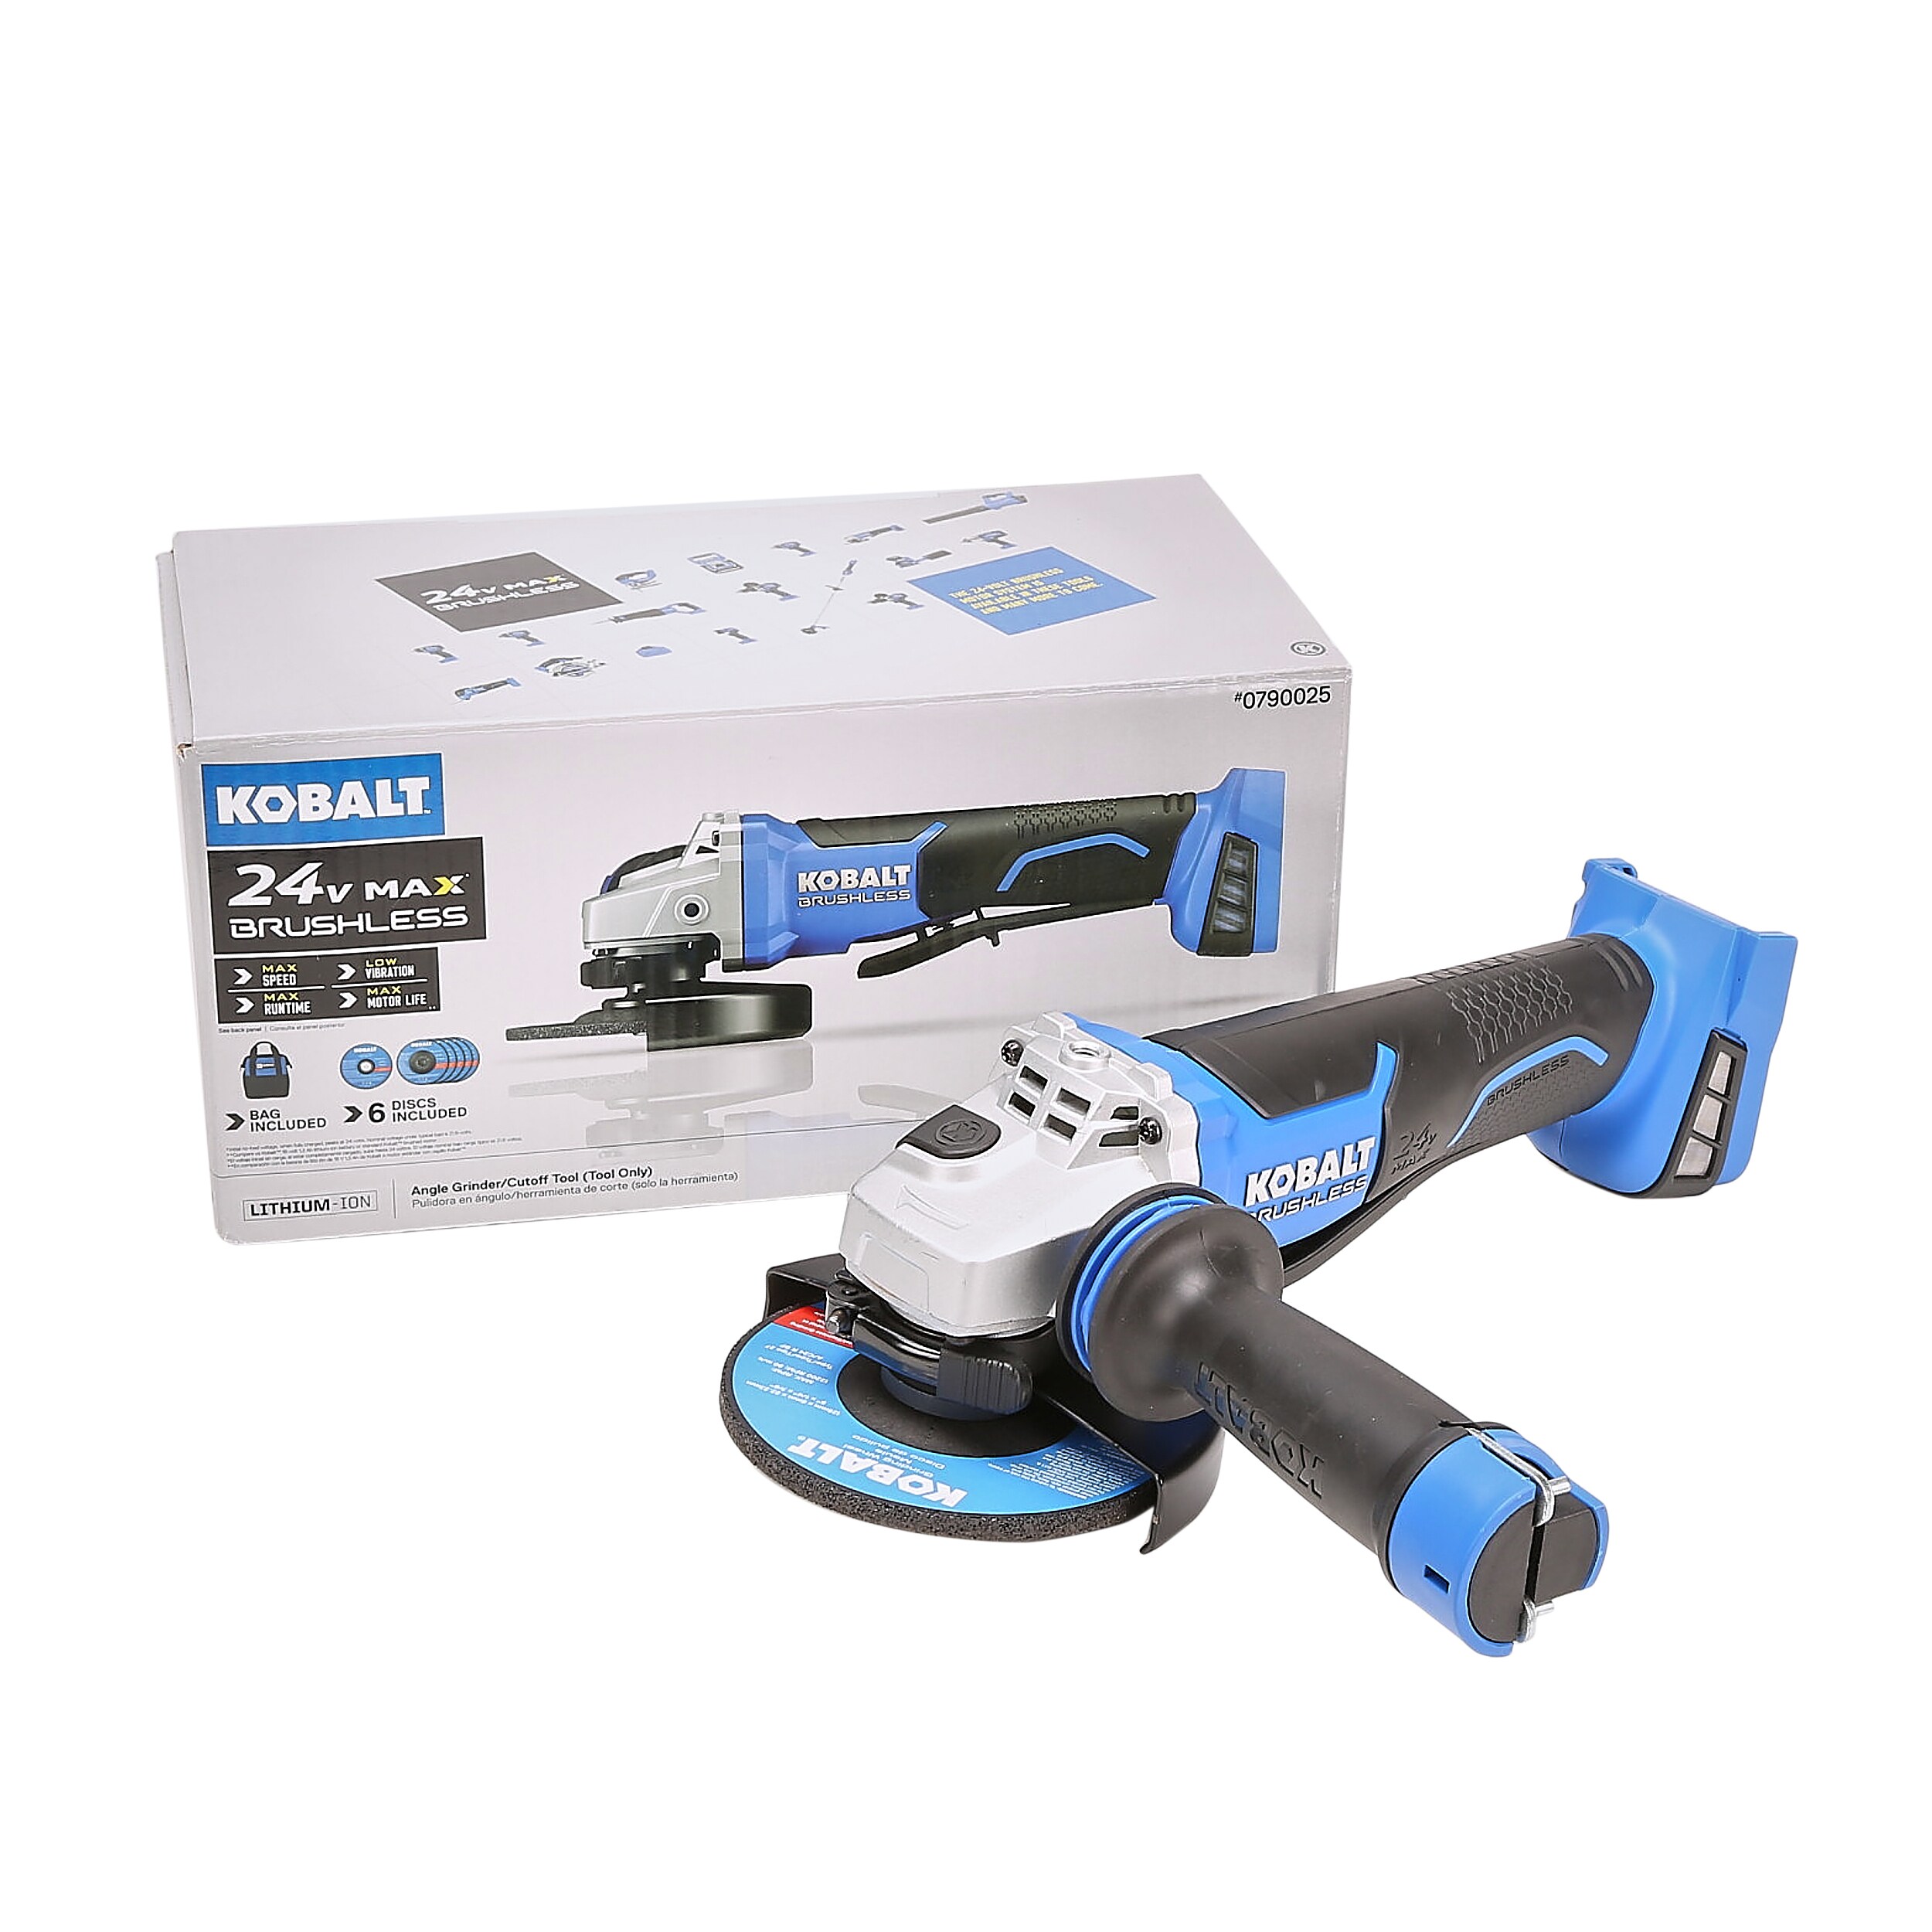 Details about   Cordless Angle Grinder 24 Volt Max Paddle Switch Brushless Powerful Tool Only 